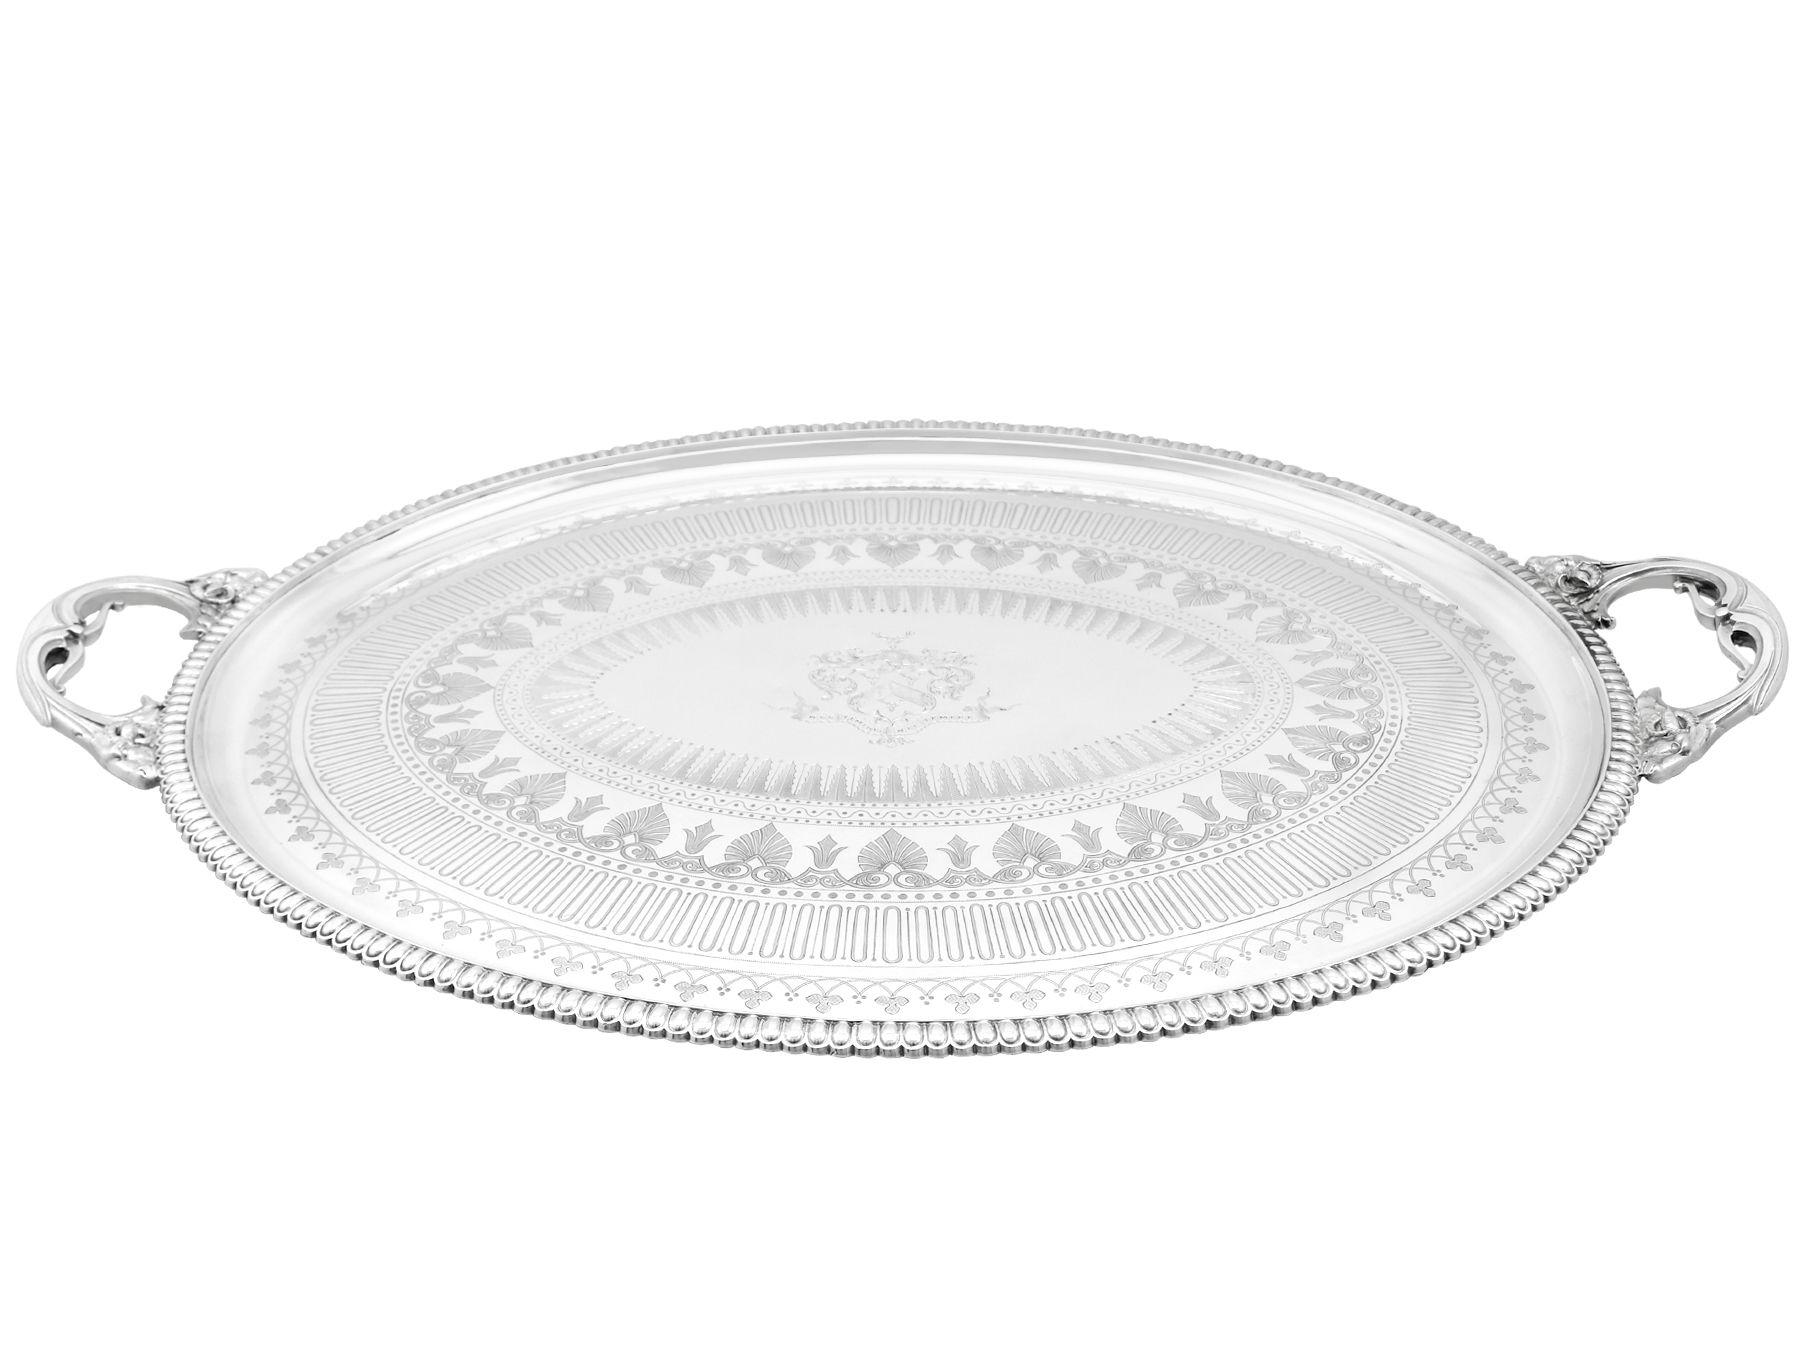 A magnificent, fine and impressive antique Victorian English sterling silver tea tray made by Elkington & Co; an addition to our silver tray collection.
This magnificent antique Victorian sterling silver tray has an oval form.
The surface of the